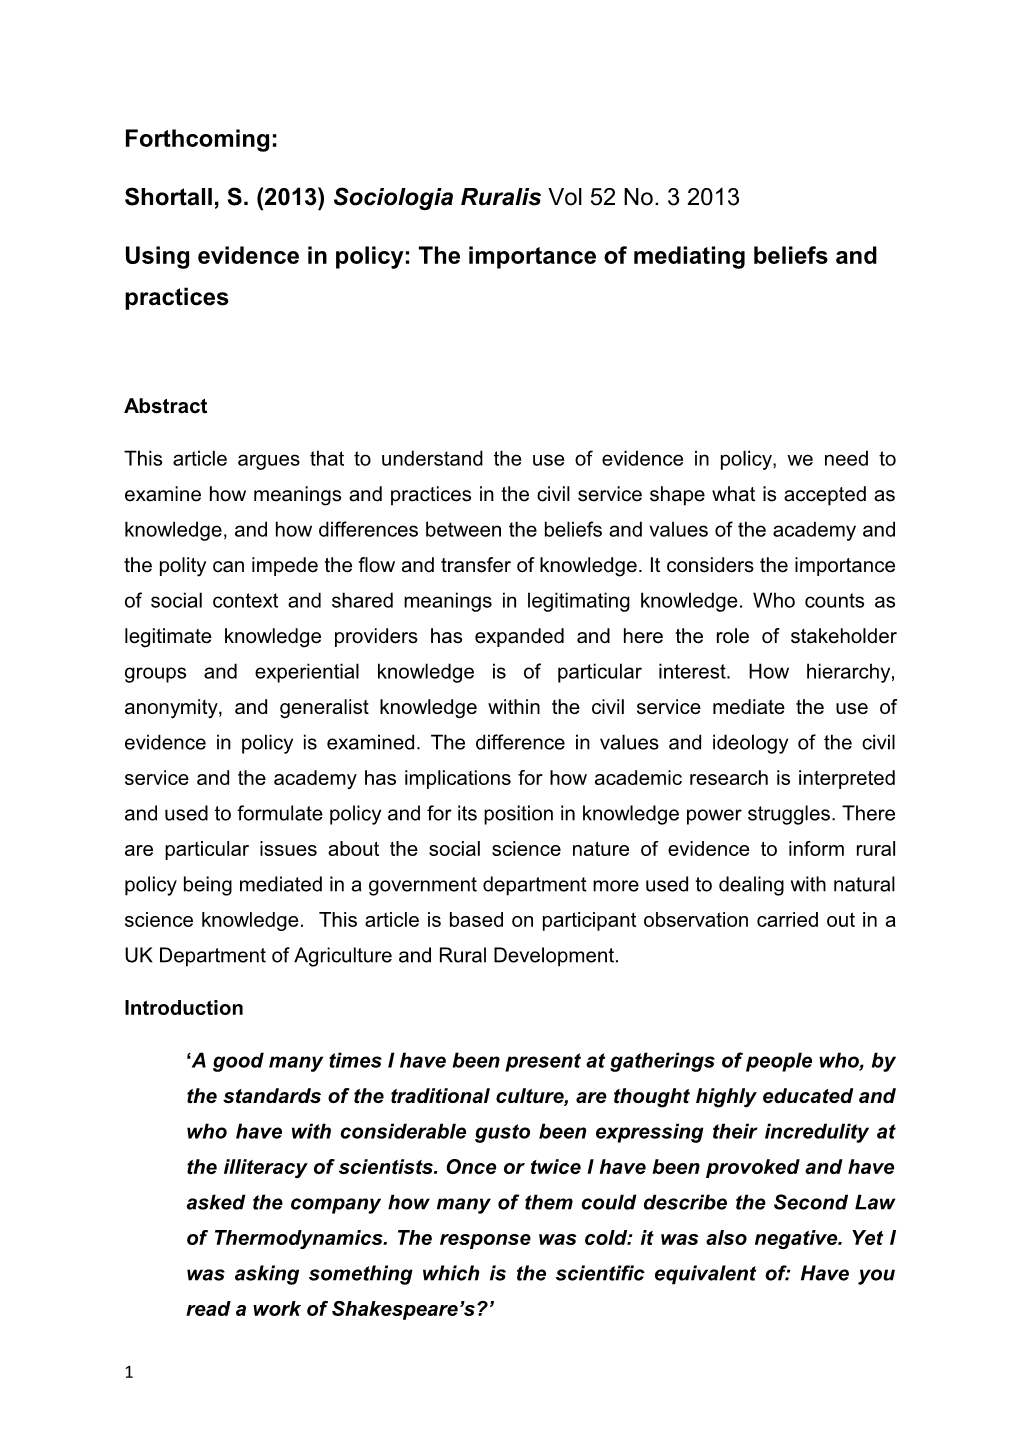 Using Evidence in Policy: the Importance of Mediating Beliefs and Practices